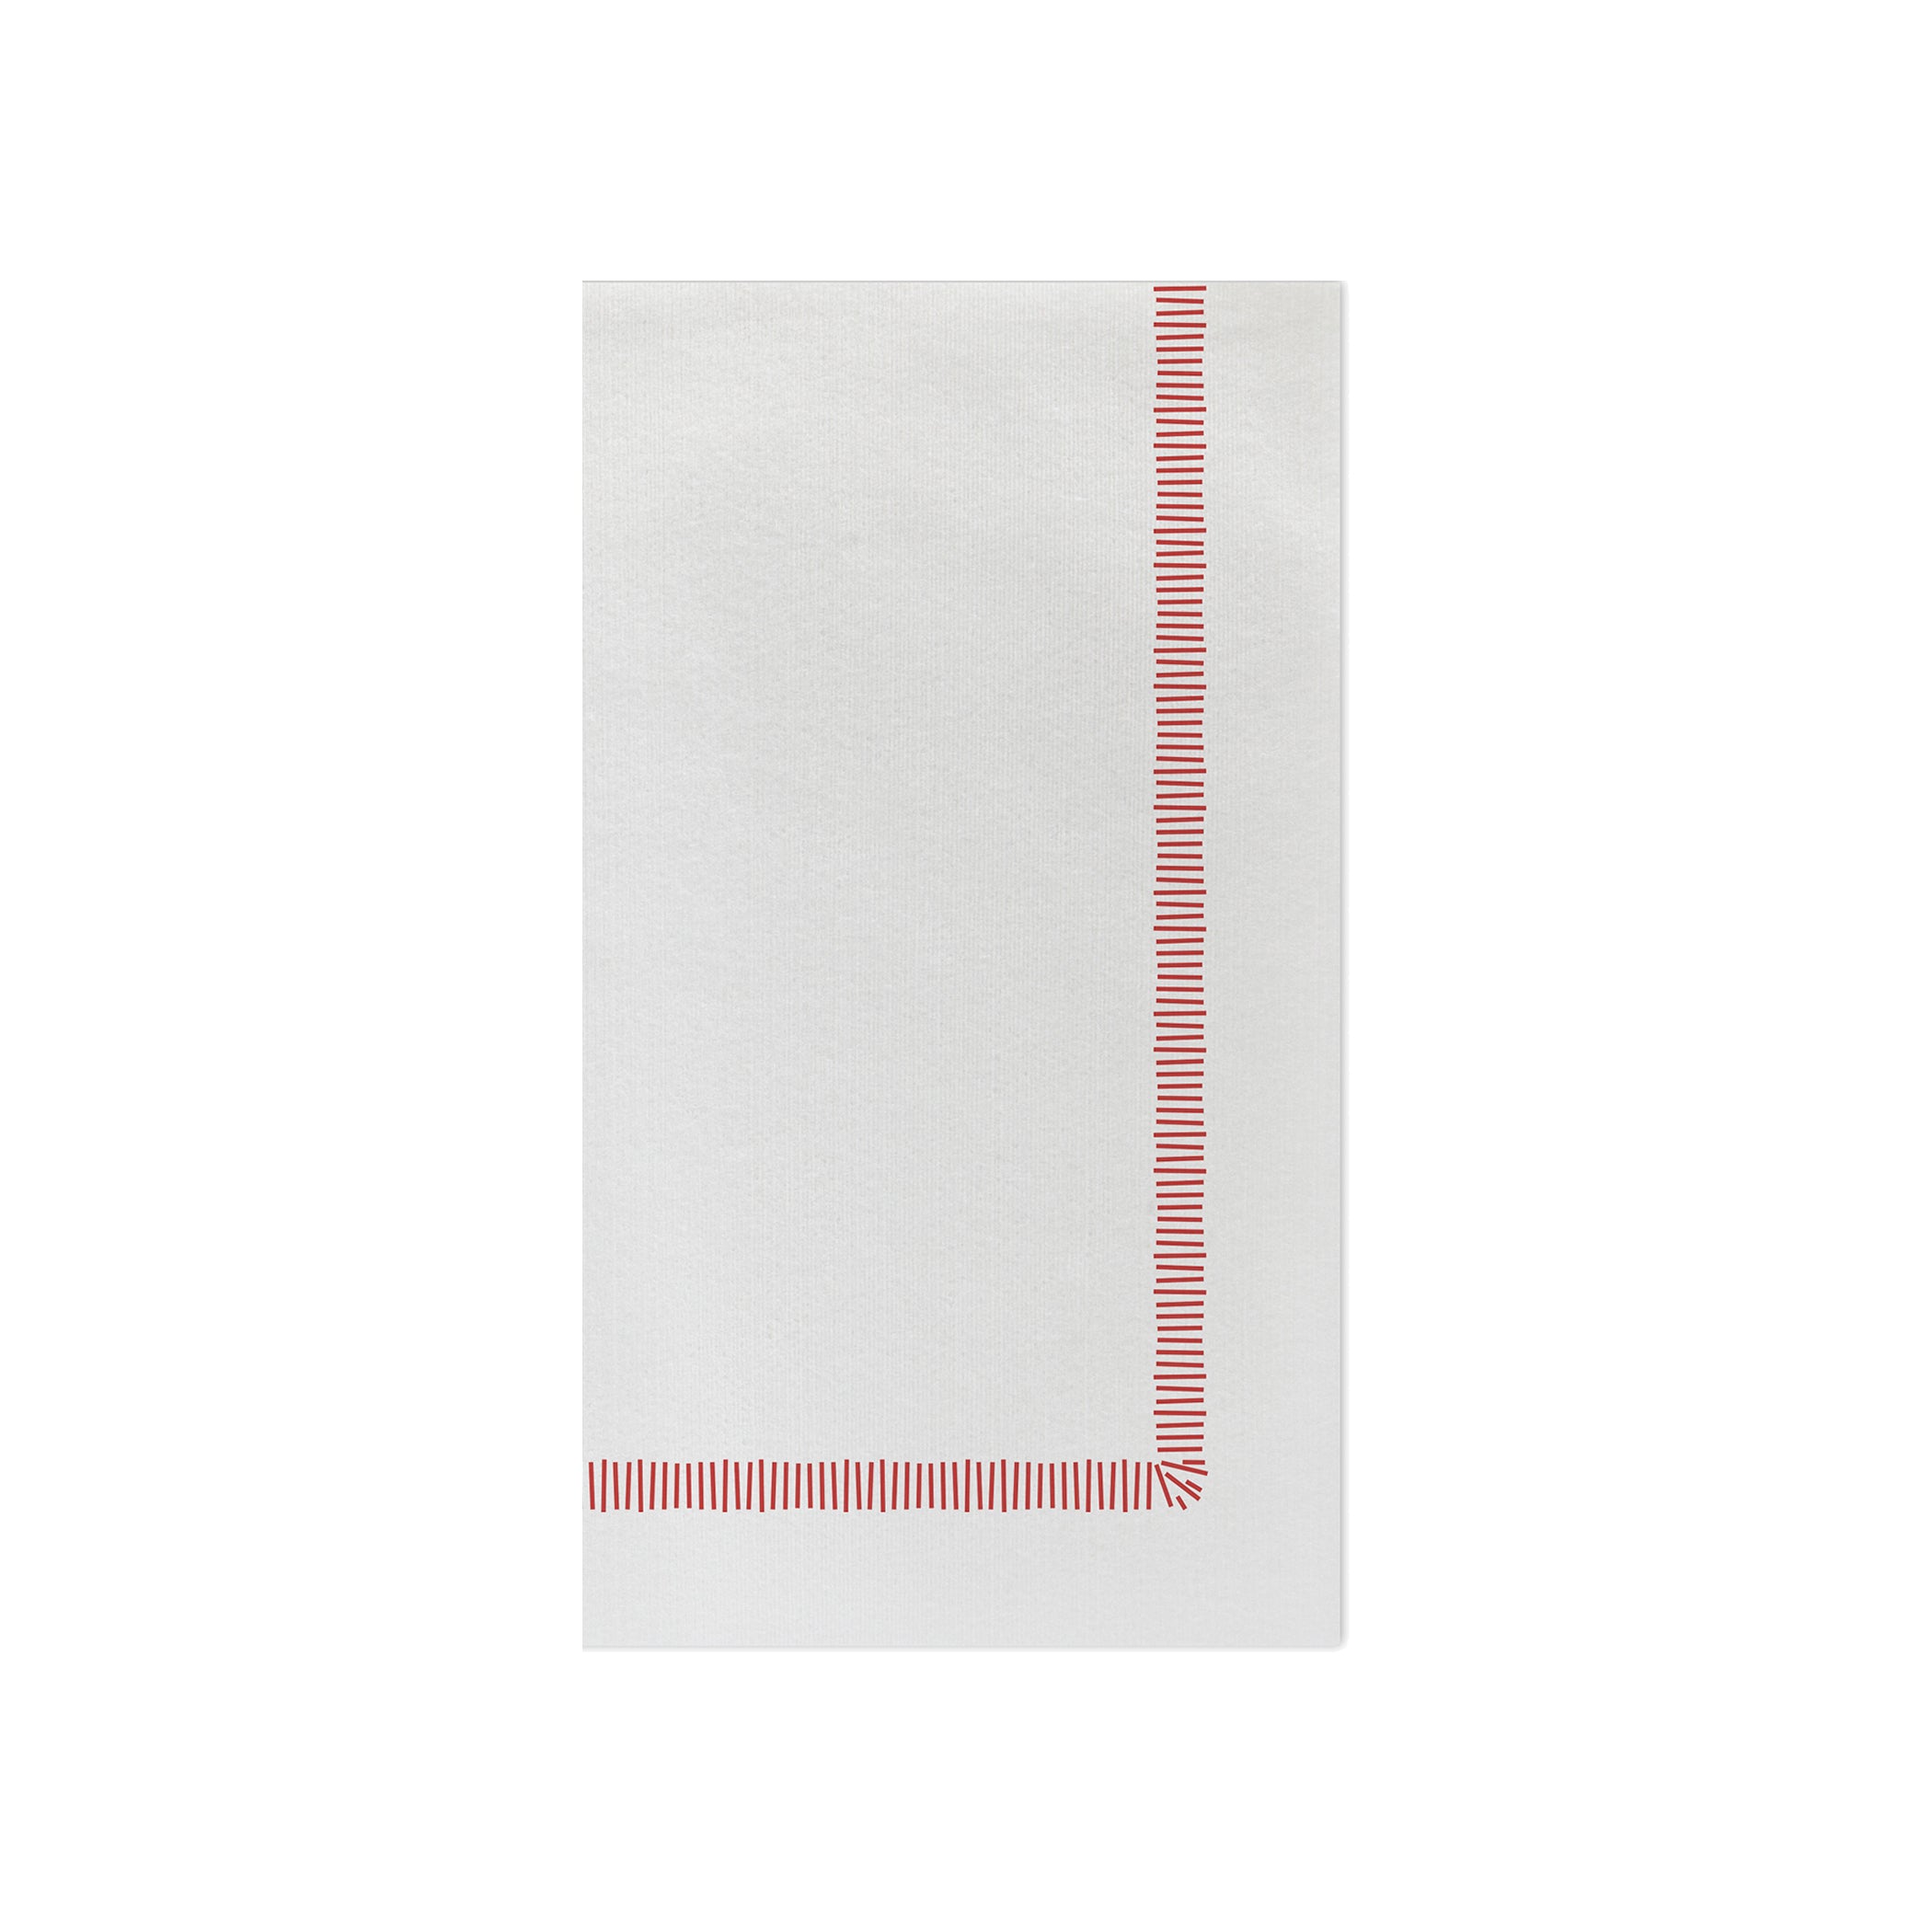 Papersoft Napkins Fringe Red Guest Towels - Pack of 20